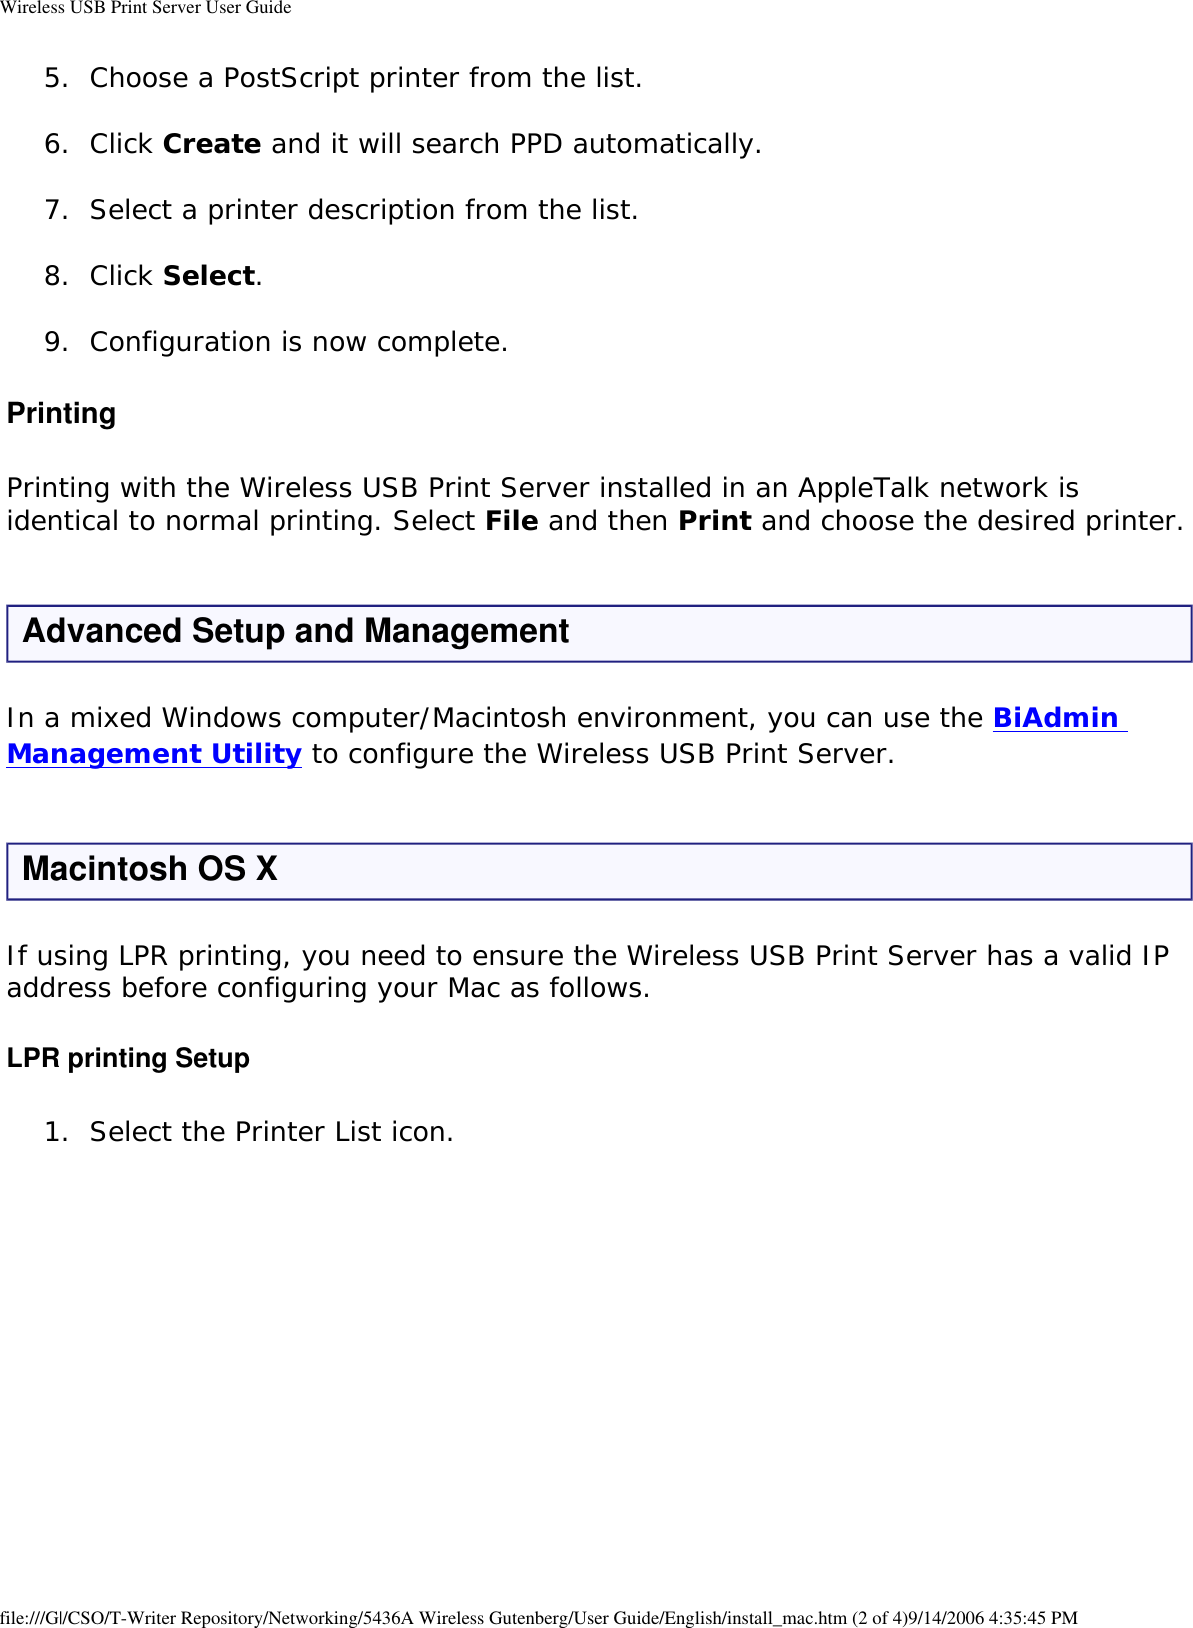 Wireless USB Print Server User Guide5.  Choose a PostScript printer from the list. 6.  Click Create and it will search PPD automatically. 7.  Select a printer description from the list. 8.  Click Select. 9.  Configuration is now complete. PrintingPrinting with the Wireless USB Print Server installed in an AppleTalk network is identical to normal printing. Select File and then Print and choose the desired printer.Advanced Setup and ManagementIn a mixed Windows computer/Macintosh environment, you can use the BiAdmin Management Utility to configure the Wireless USB Print Server. Macintosh OS XIf using LPR printing, you need to ensure the Wireless USB Print Server has a valid IP address before configuring your Mac as follows.LPR printing Setup1.  Select the Printer List icon.   file:///G|/CSO/T-Writer Repository/Networking/5436A Wireless Gutenberg/User Guide/English/install_mac.htm (2 of 4)9/14/2006 4:35:45 PM